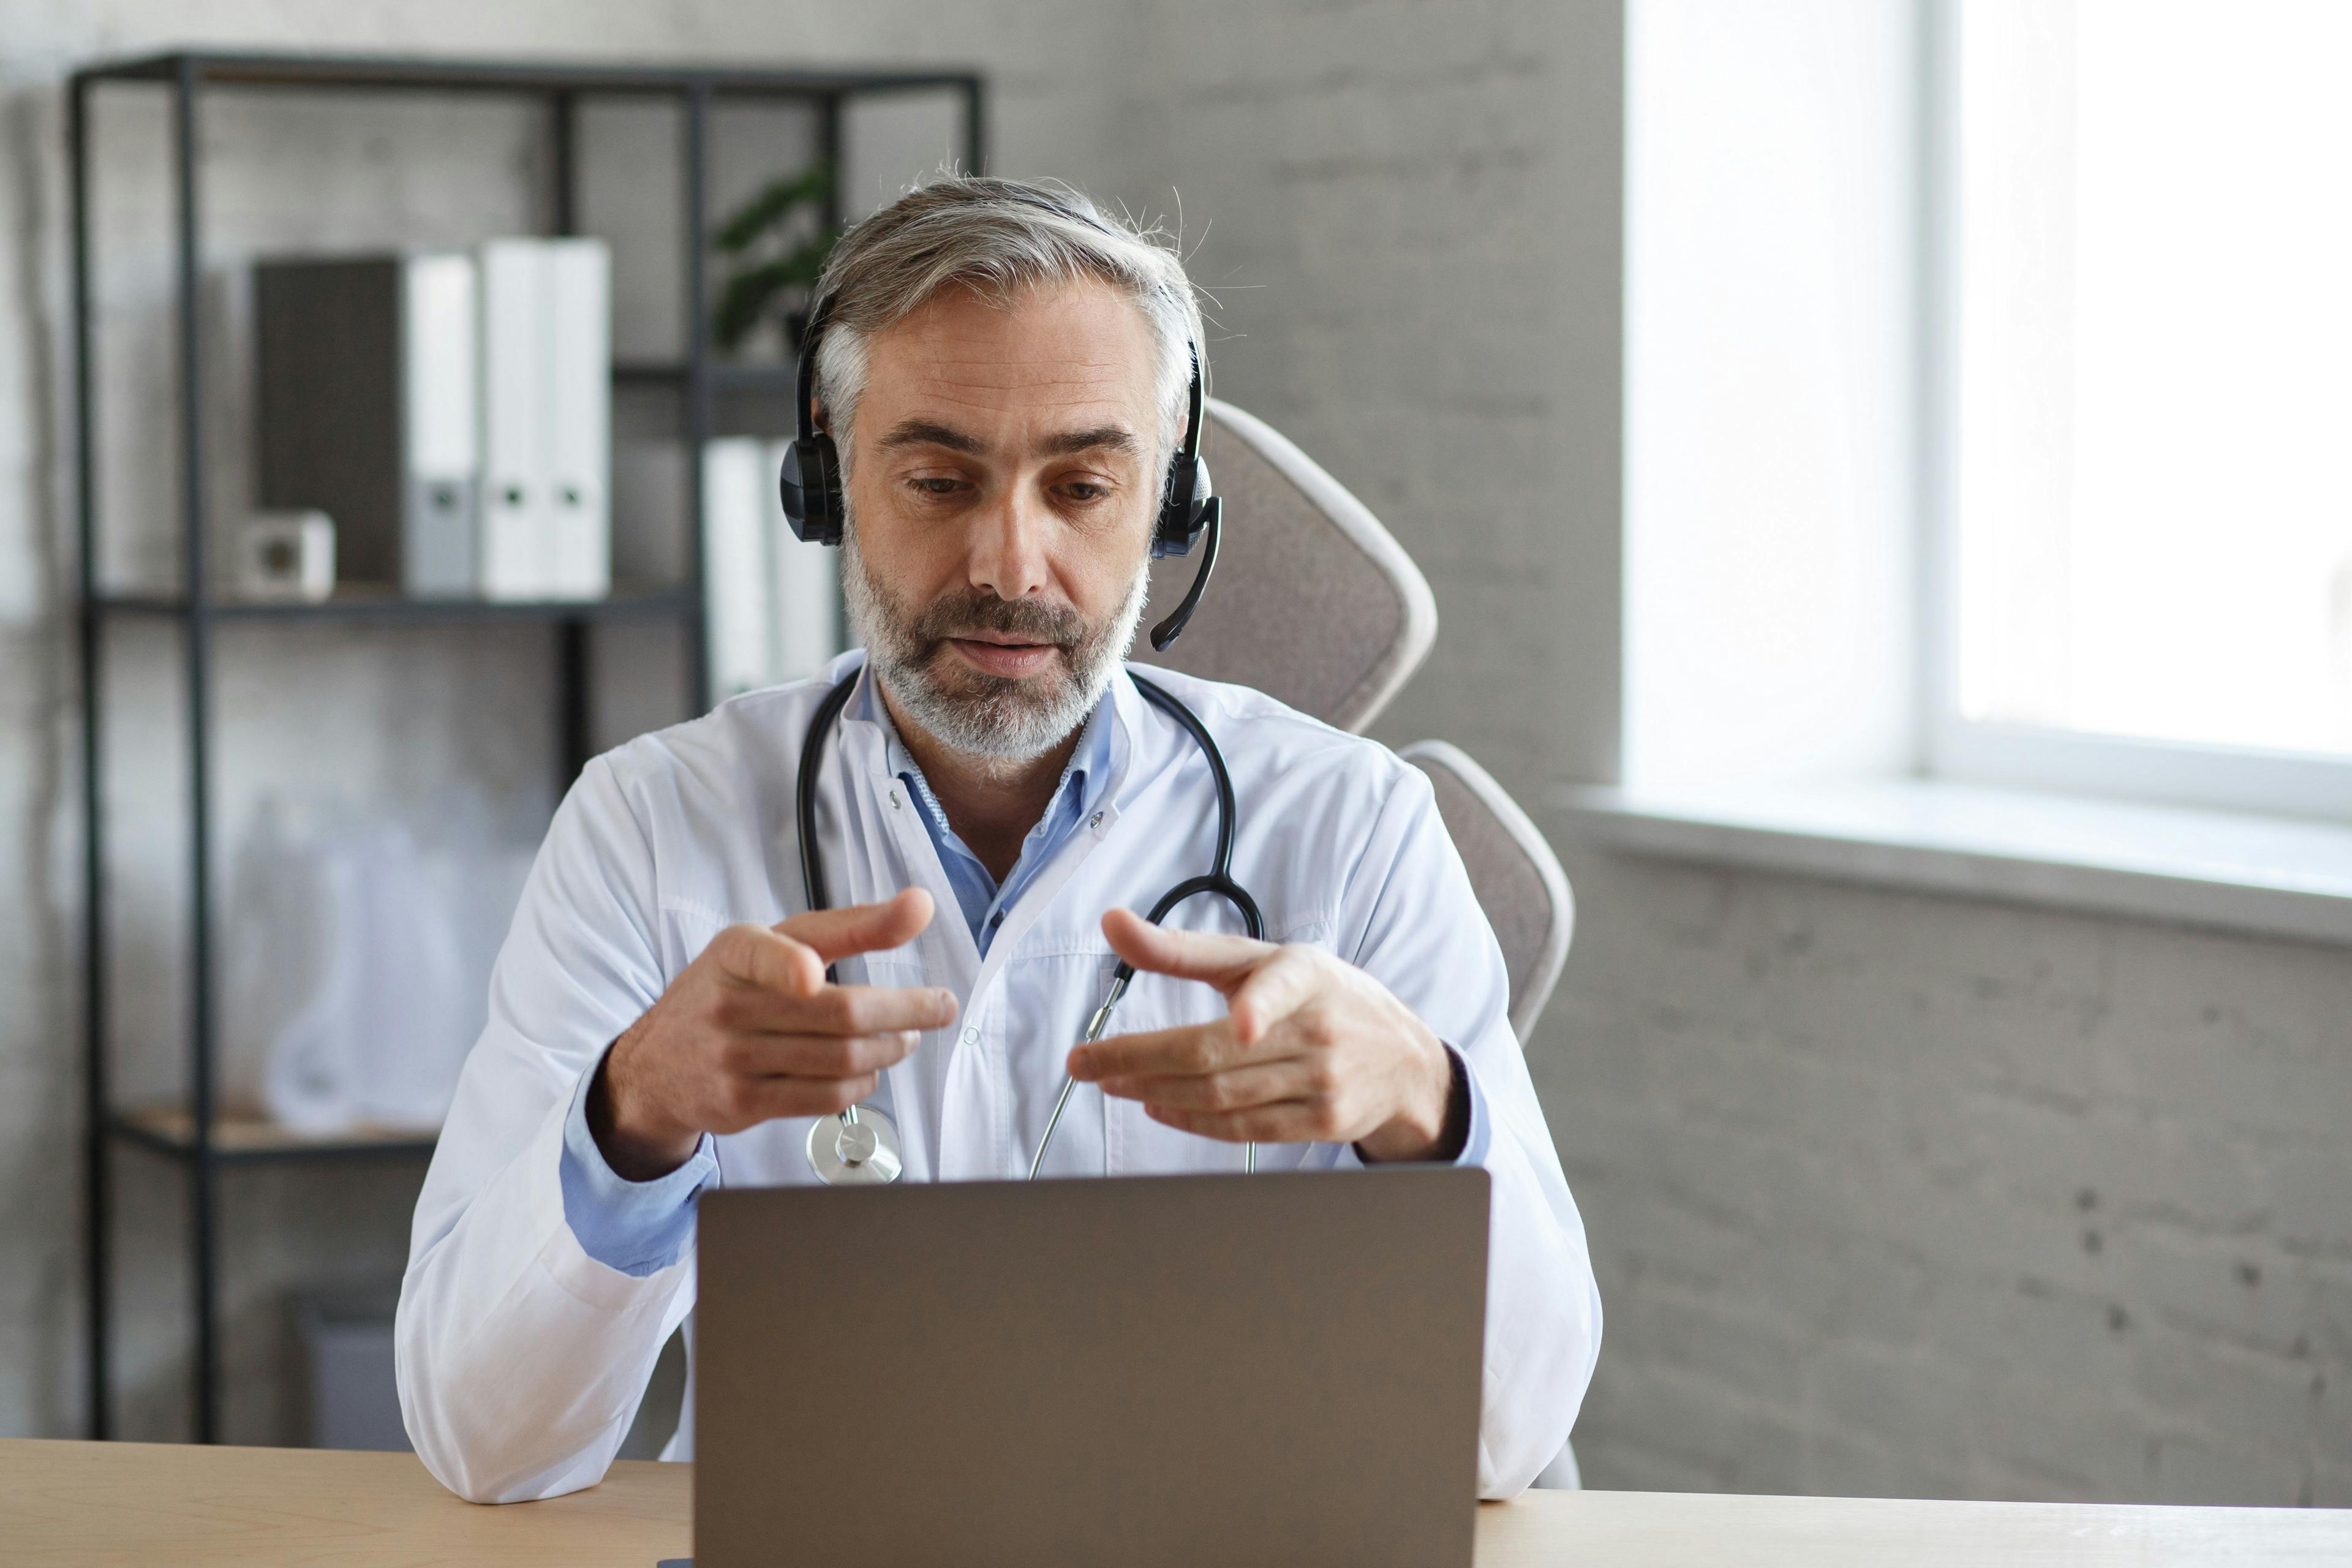 Telehealth advocates welcomed the recent extension of flexibilities regarding remote care. But in the coming months, they will push to make reforms permanent. (Image credit: ©YuriiMaslak - stock.adobe.com)